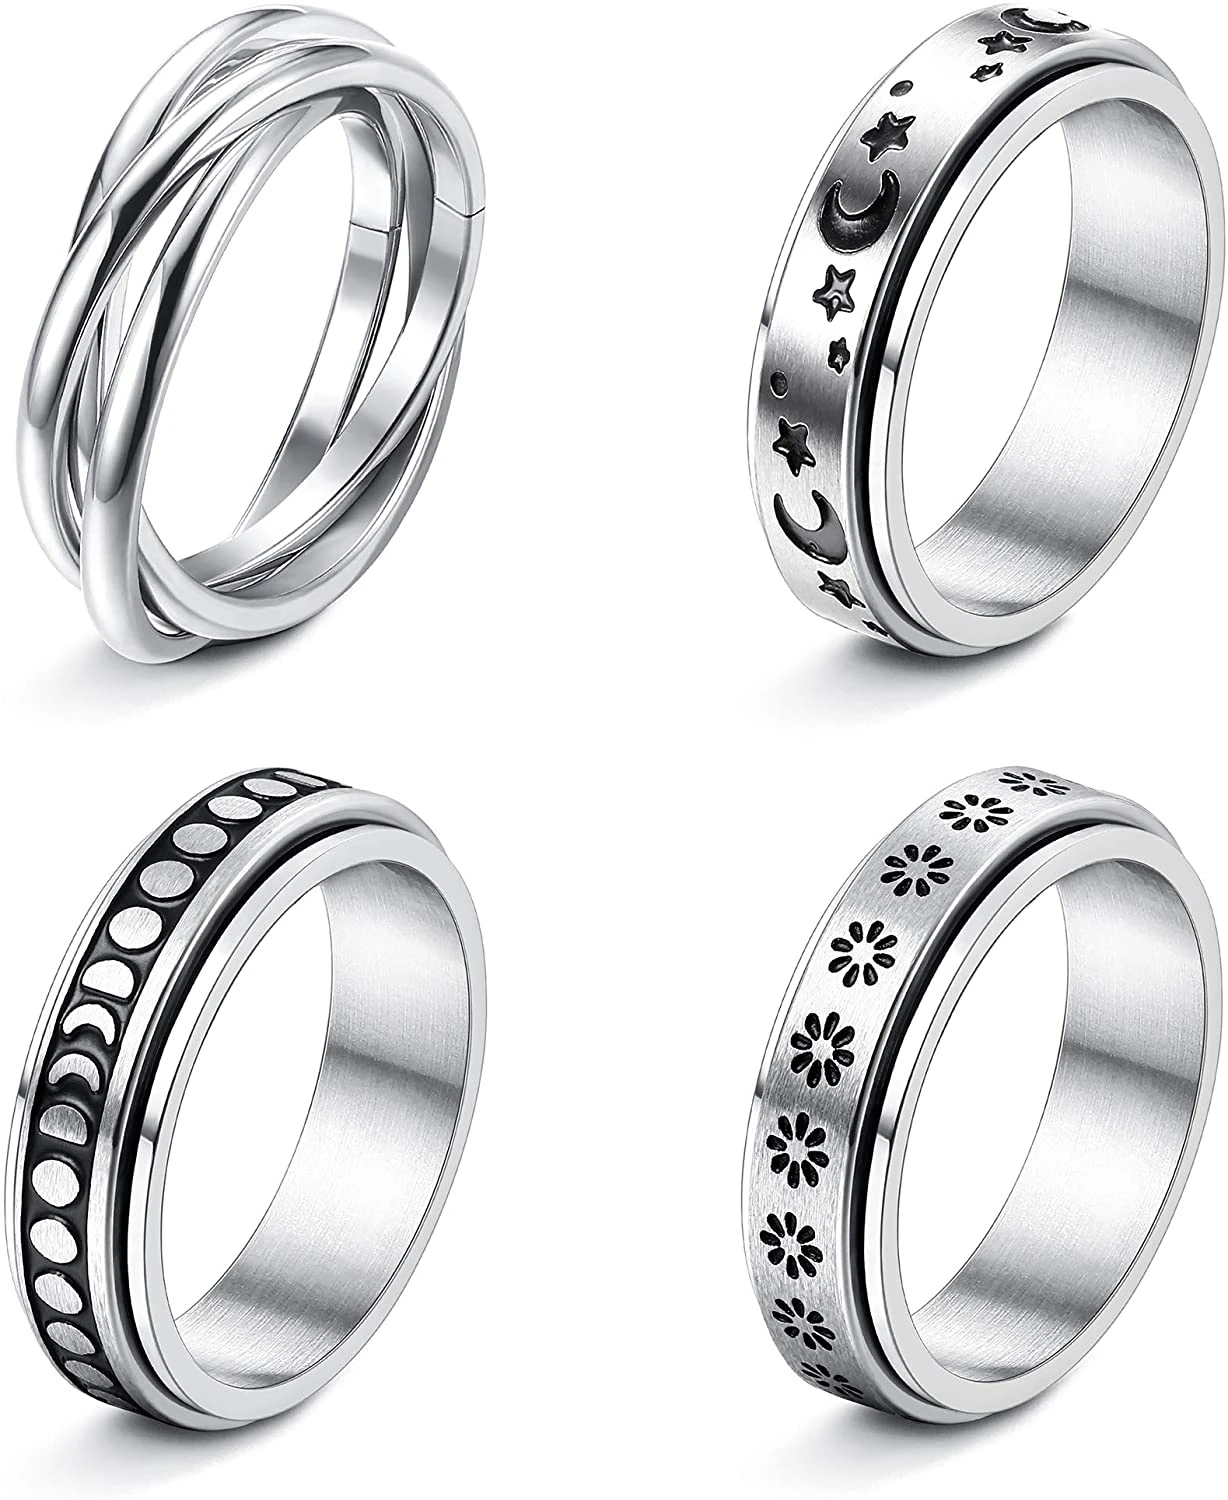 4Pcs Stainless Steel Spinner Ring for Women Mens Fidget Band Rings Moon  Star Celtic Stress Relieving Wide Wedding Promise Rings|Rings| - AliExpress